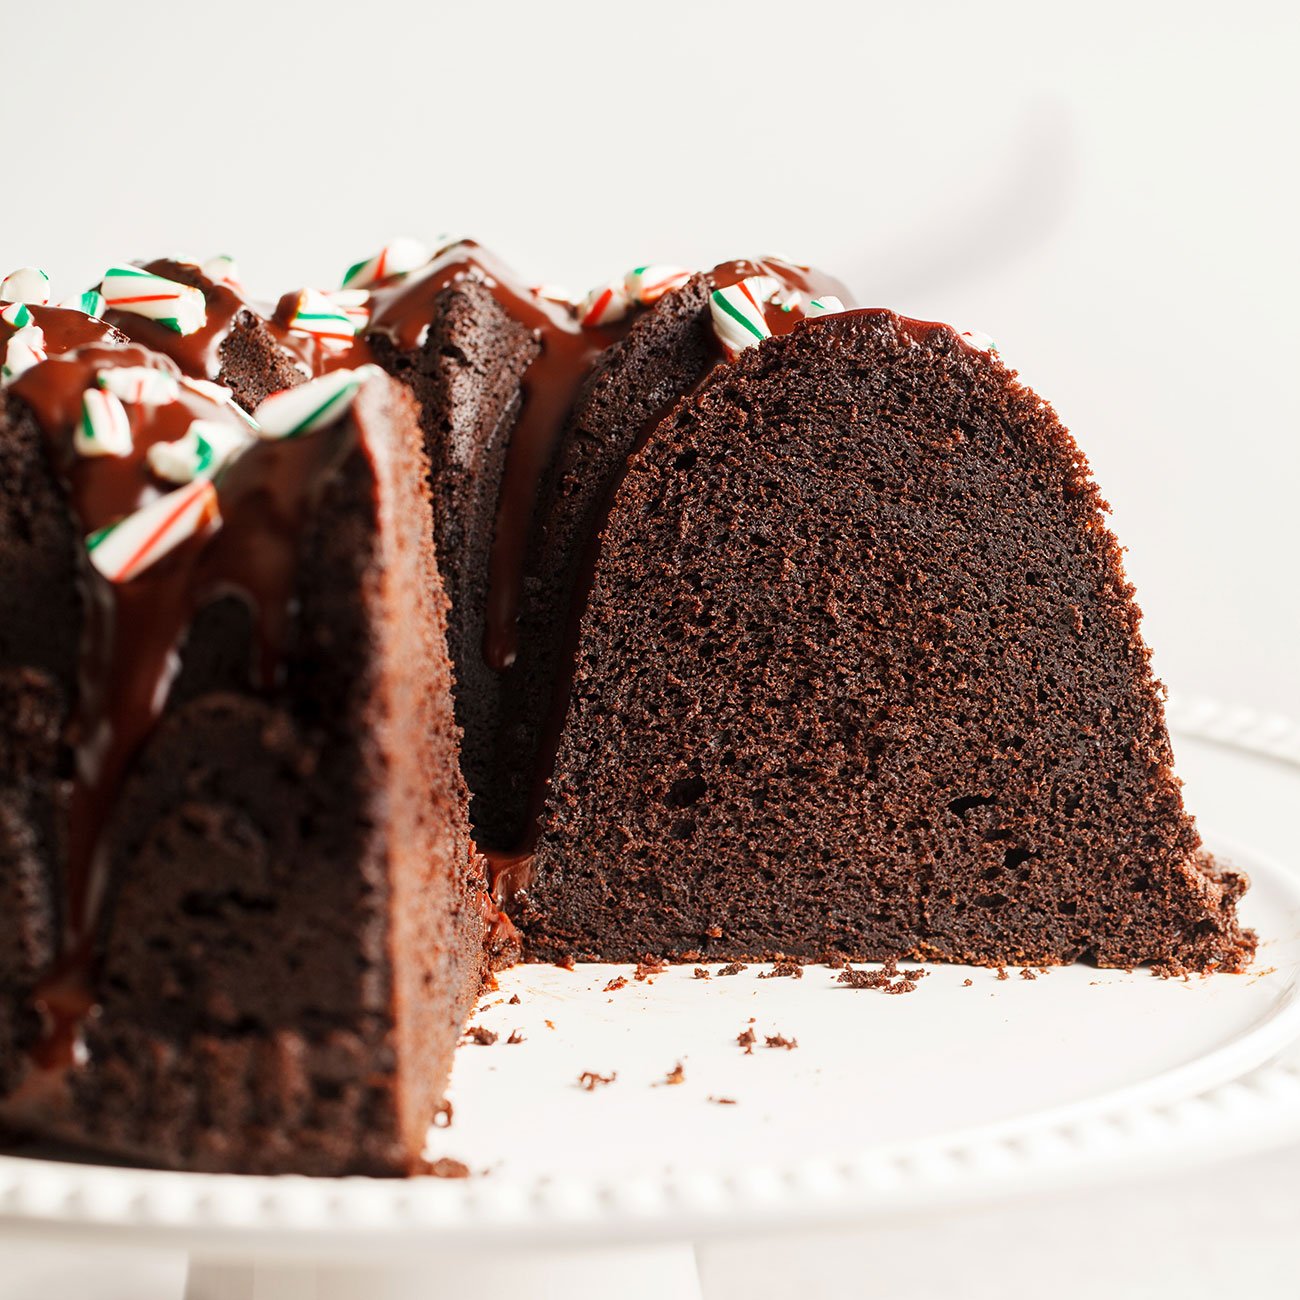 peppermint mocha bundt cake topped with chocolate ganache and crushed candy canes, placed on a white cake stand, with a slice taken out so you can see the moist interior.